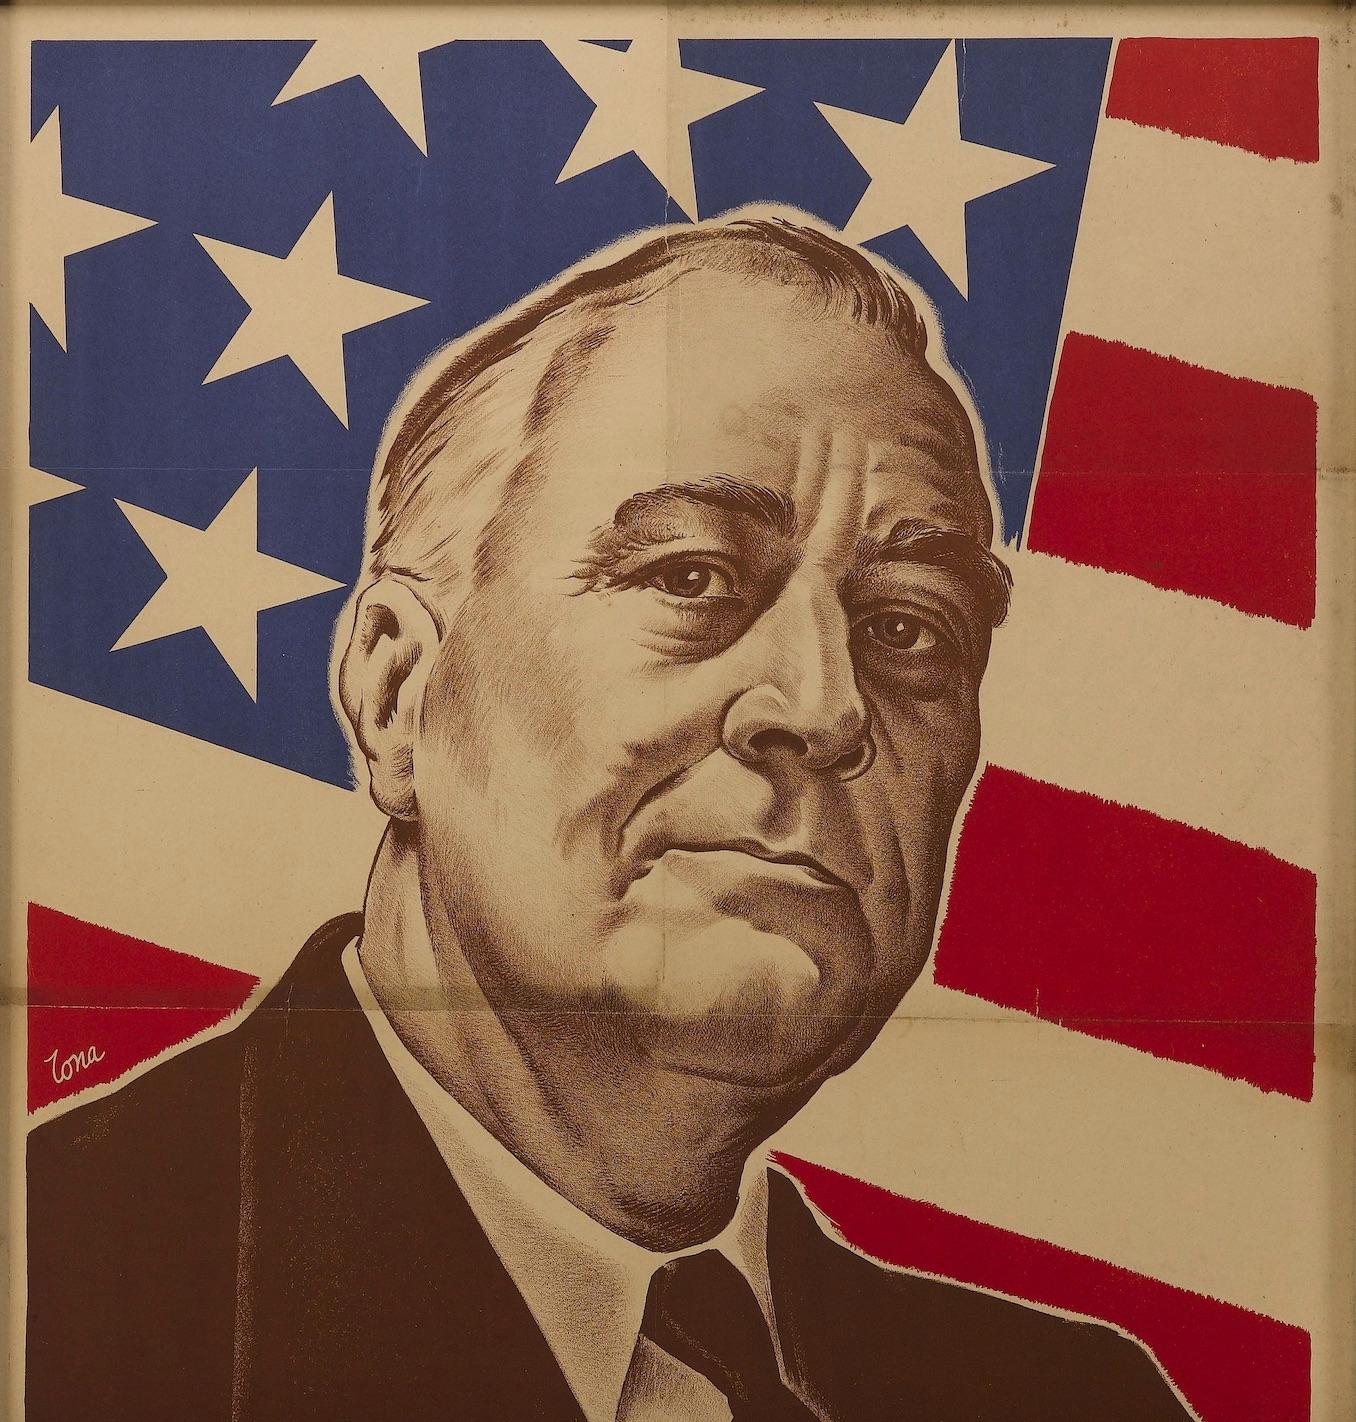 Presented is an original French propaganda poster from WWII. An illustrated portrait of President Franklin D. Roosevelt is set against the background of the American flag. Below, in white text, is the French phrase, “Notre Victoire Est La Victoire